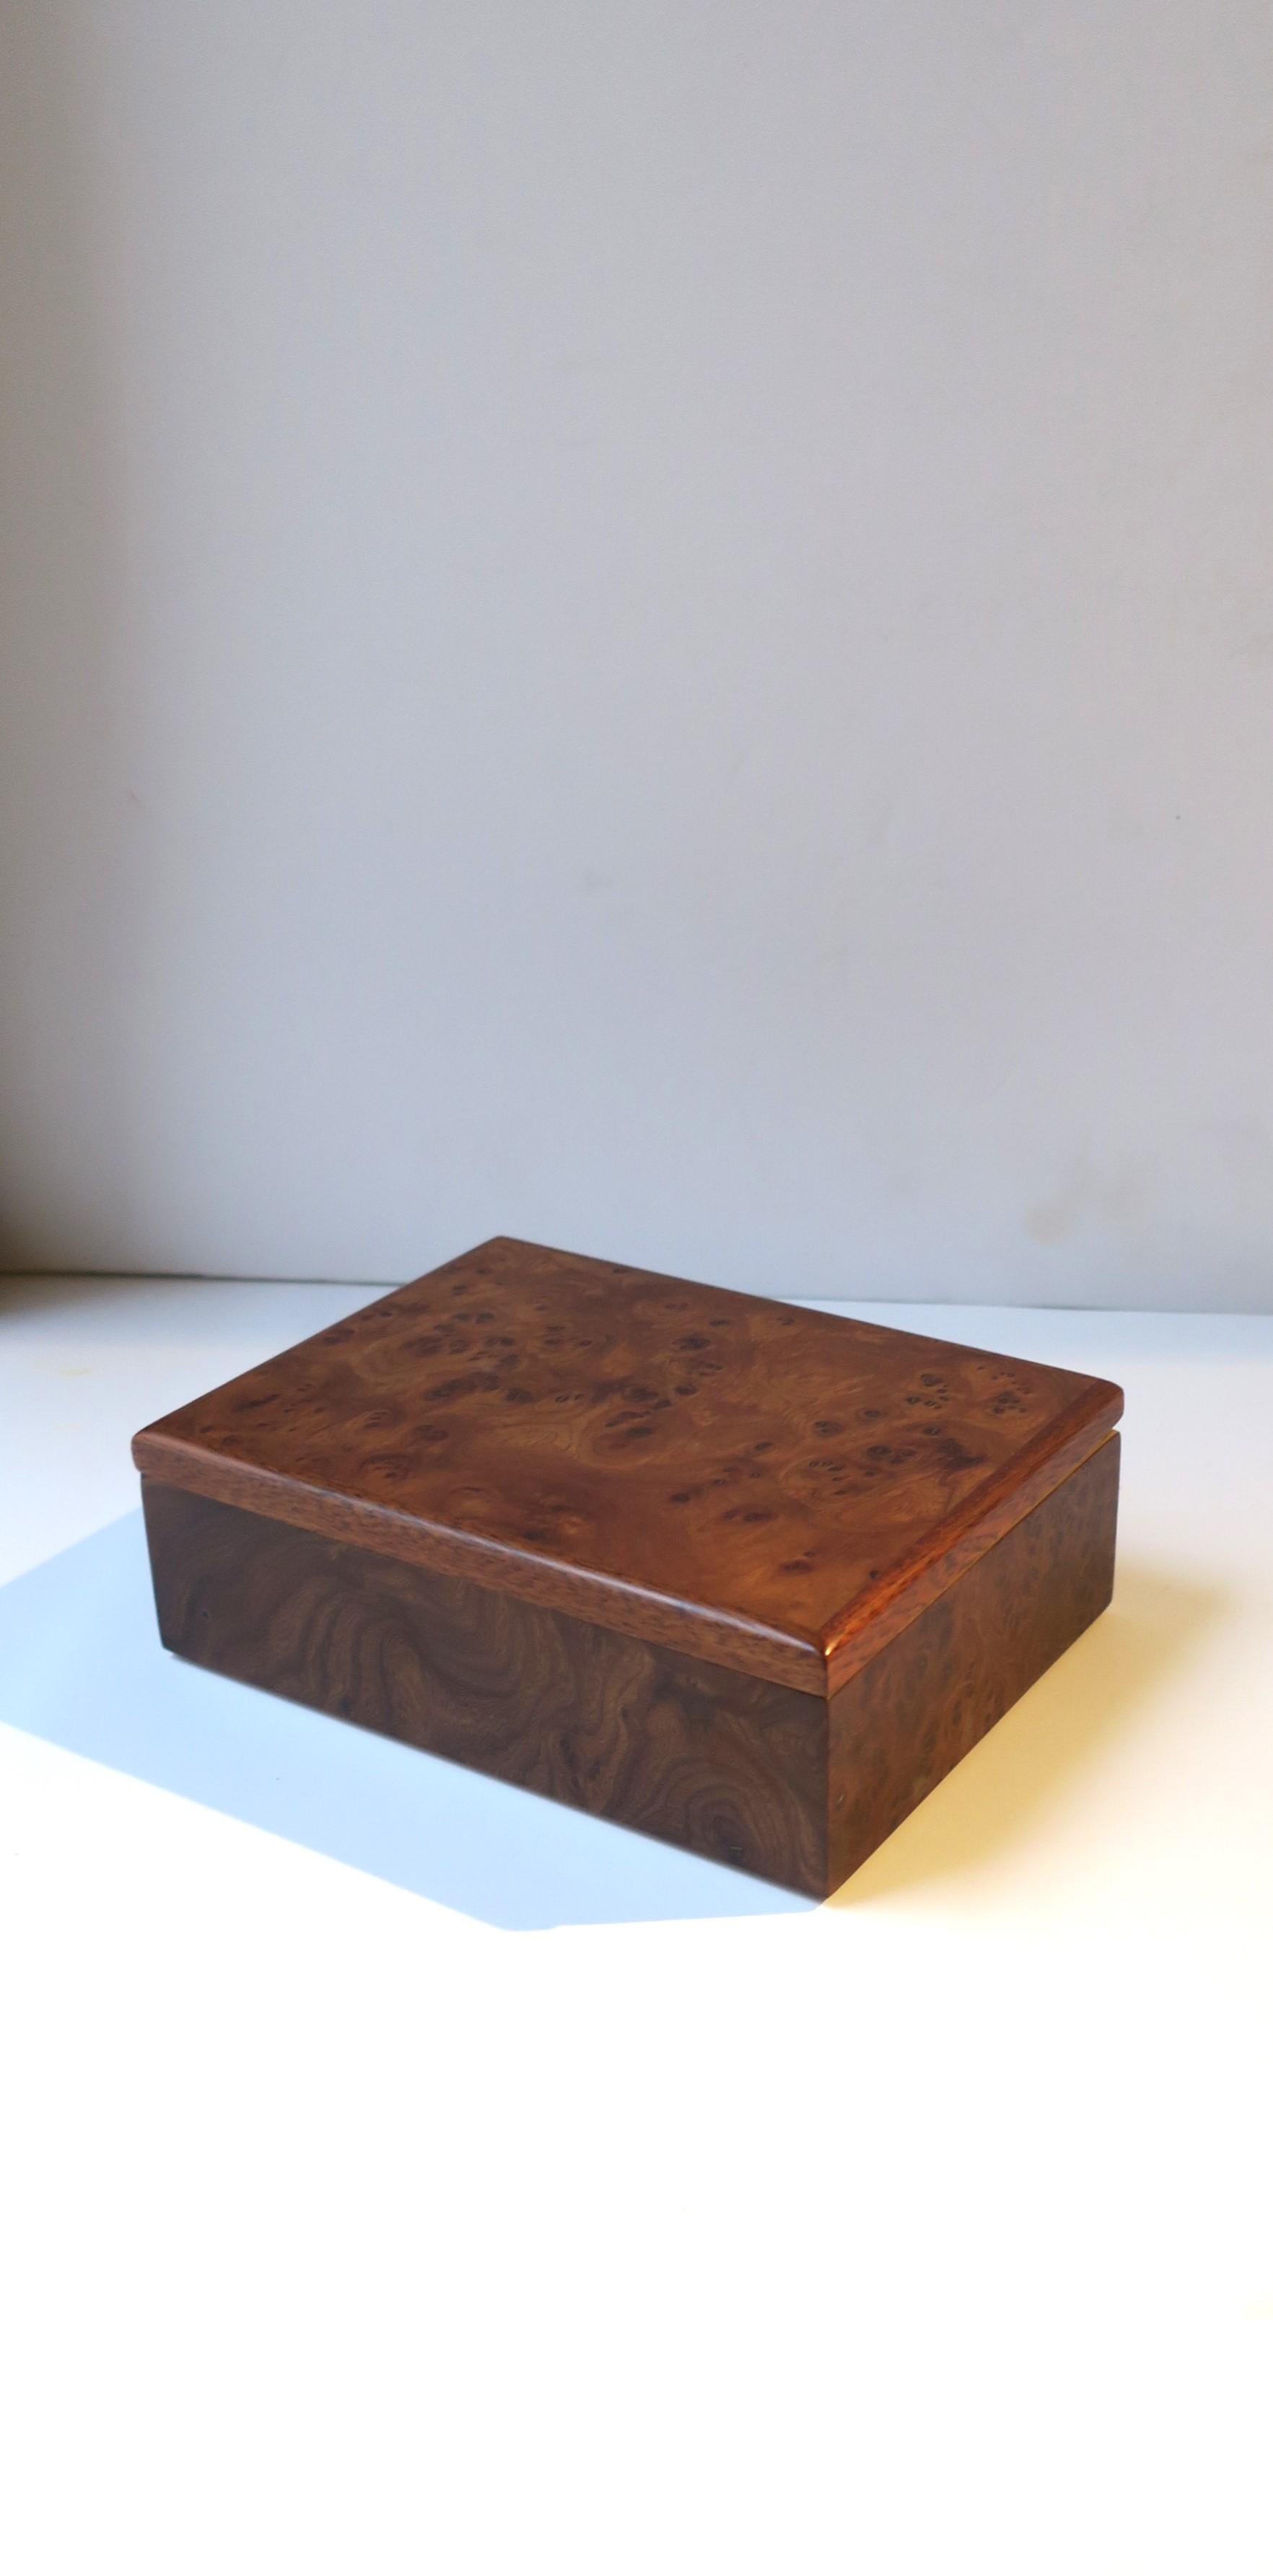 An Italian jewelry box in the modern style, circa late-20th century, Italy. Box is wood with a burl veneer and velvet lining. Box has two compartments, one for rings, cufflinks, or earrings, and the other perhaps to hold a watch, necklaces,